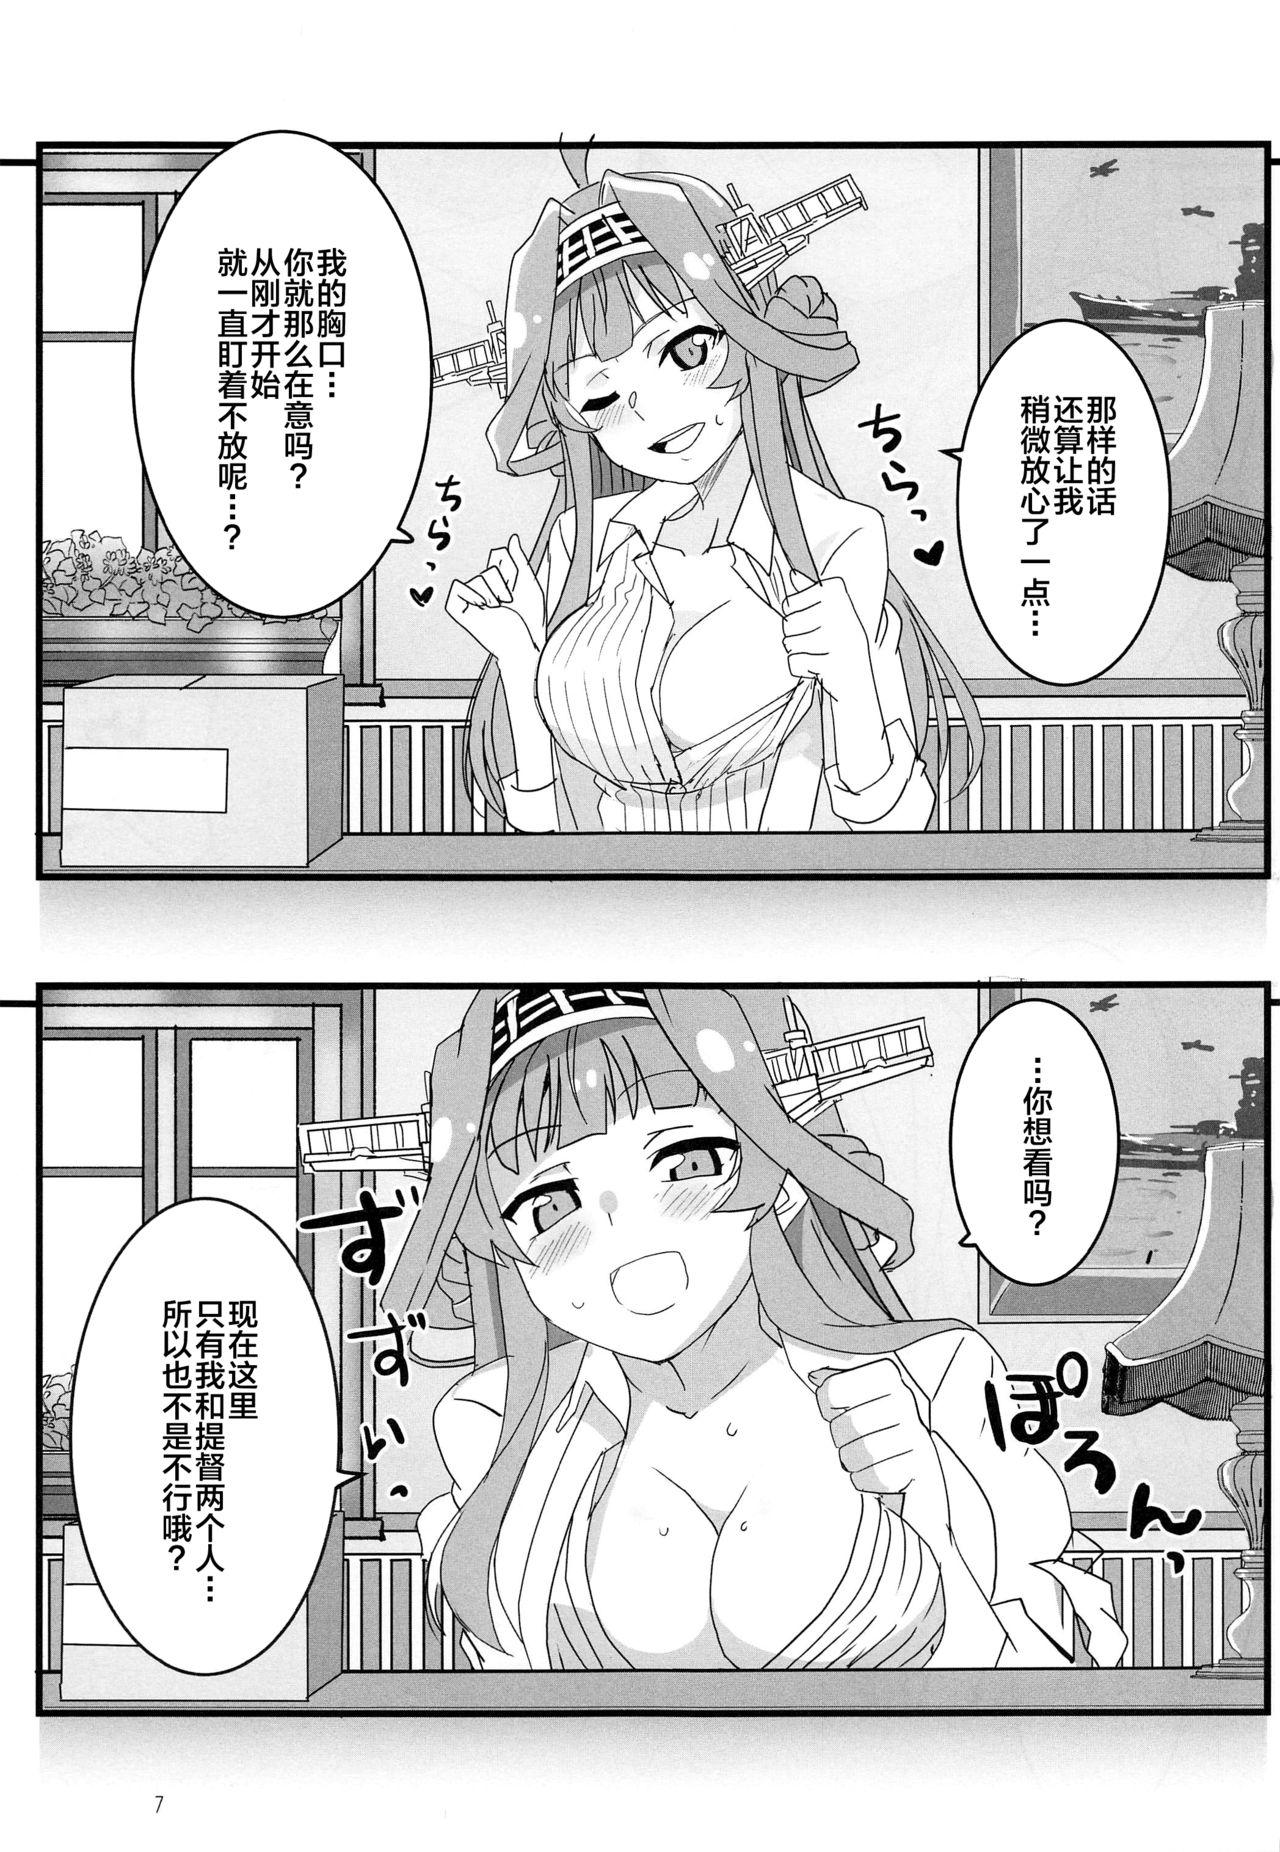 Stranger Remote Love - Kantai collection Defloration - Page 6